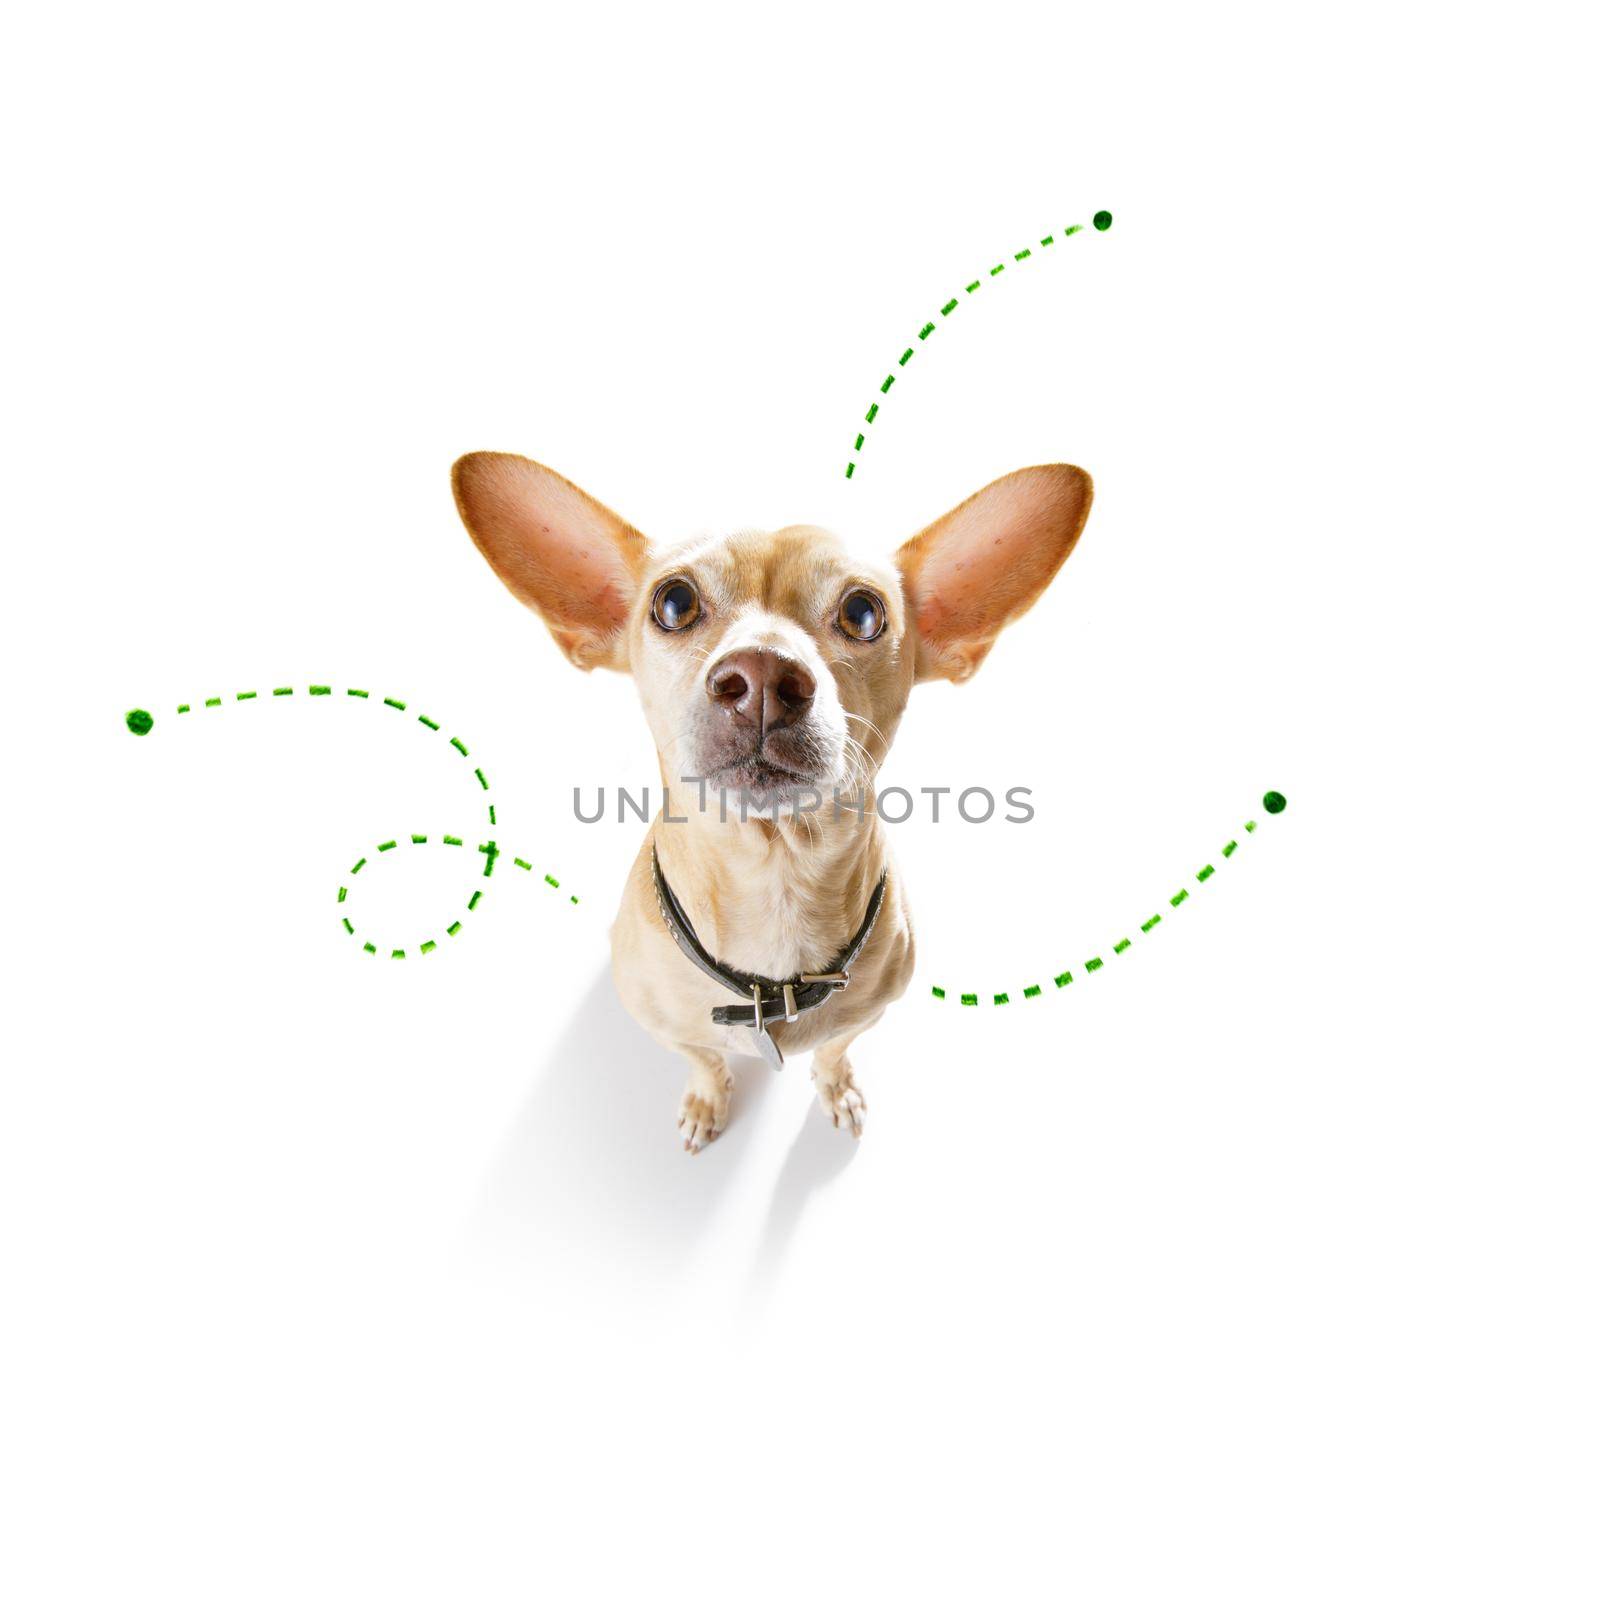 chihuahua dog considering the problem of tick insects and fleas , close to scratch its skin or fur , isolated on white background